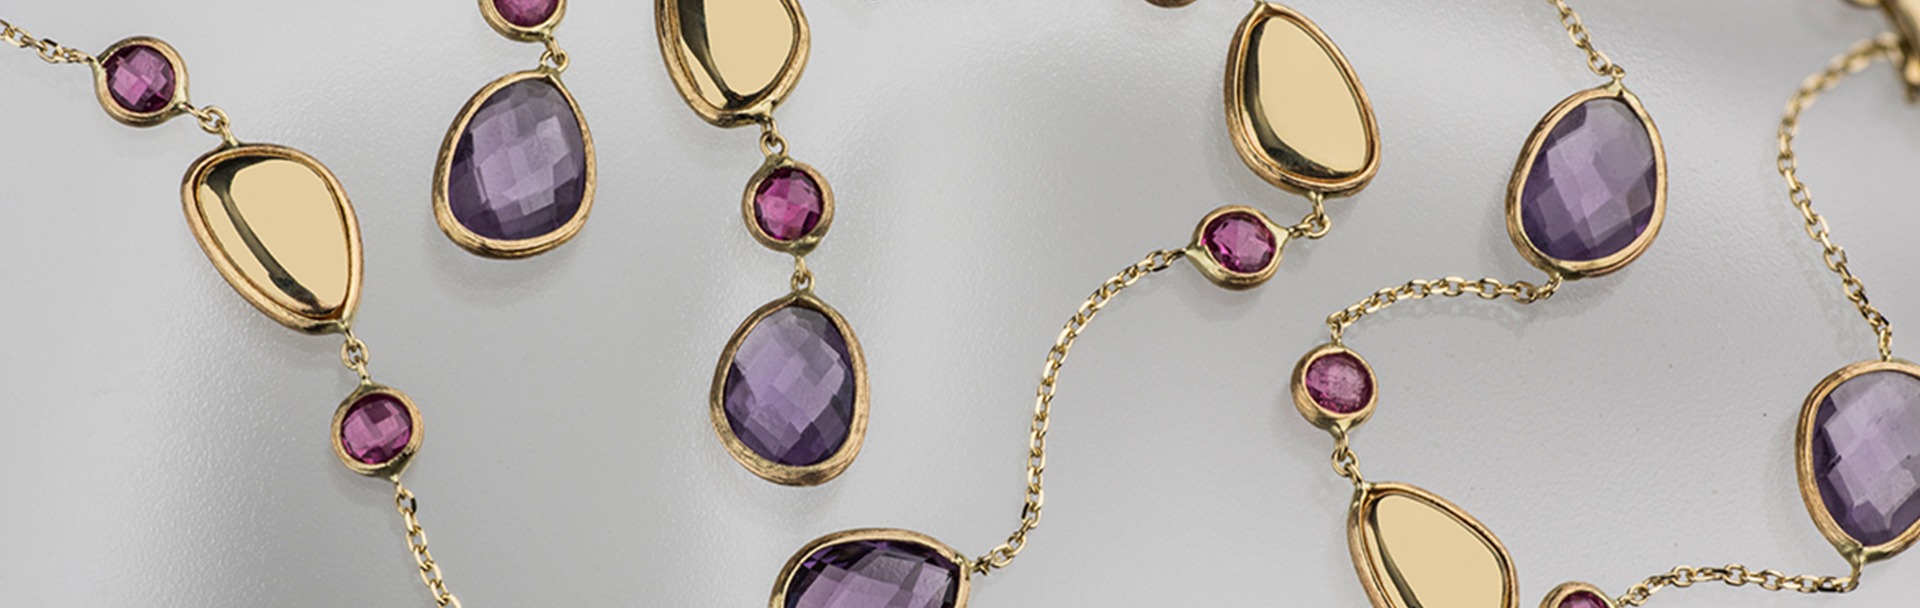 Violets Collection |14K Gold Jewelry with Amethyst and Ruby